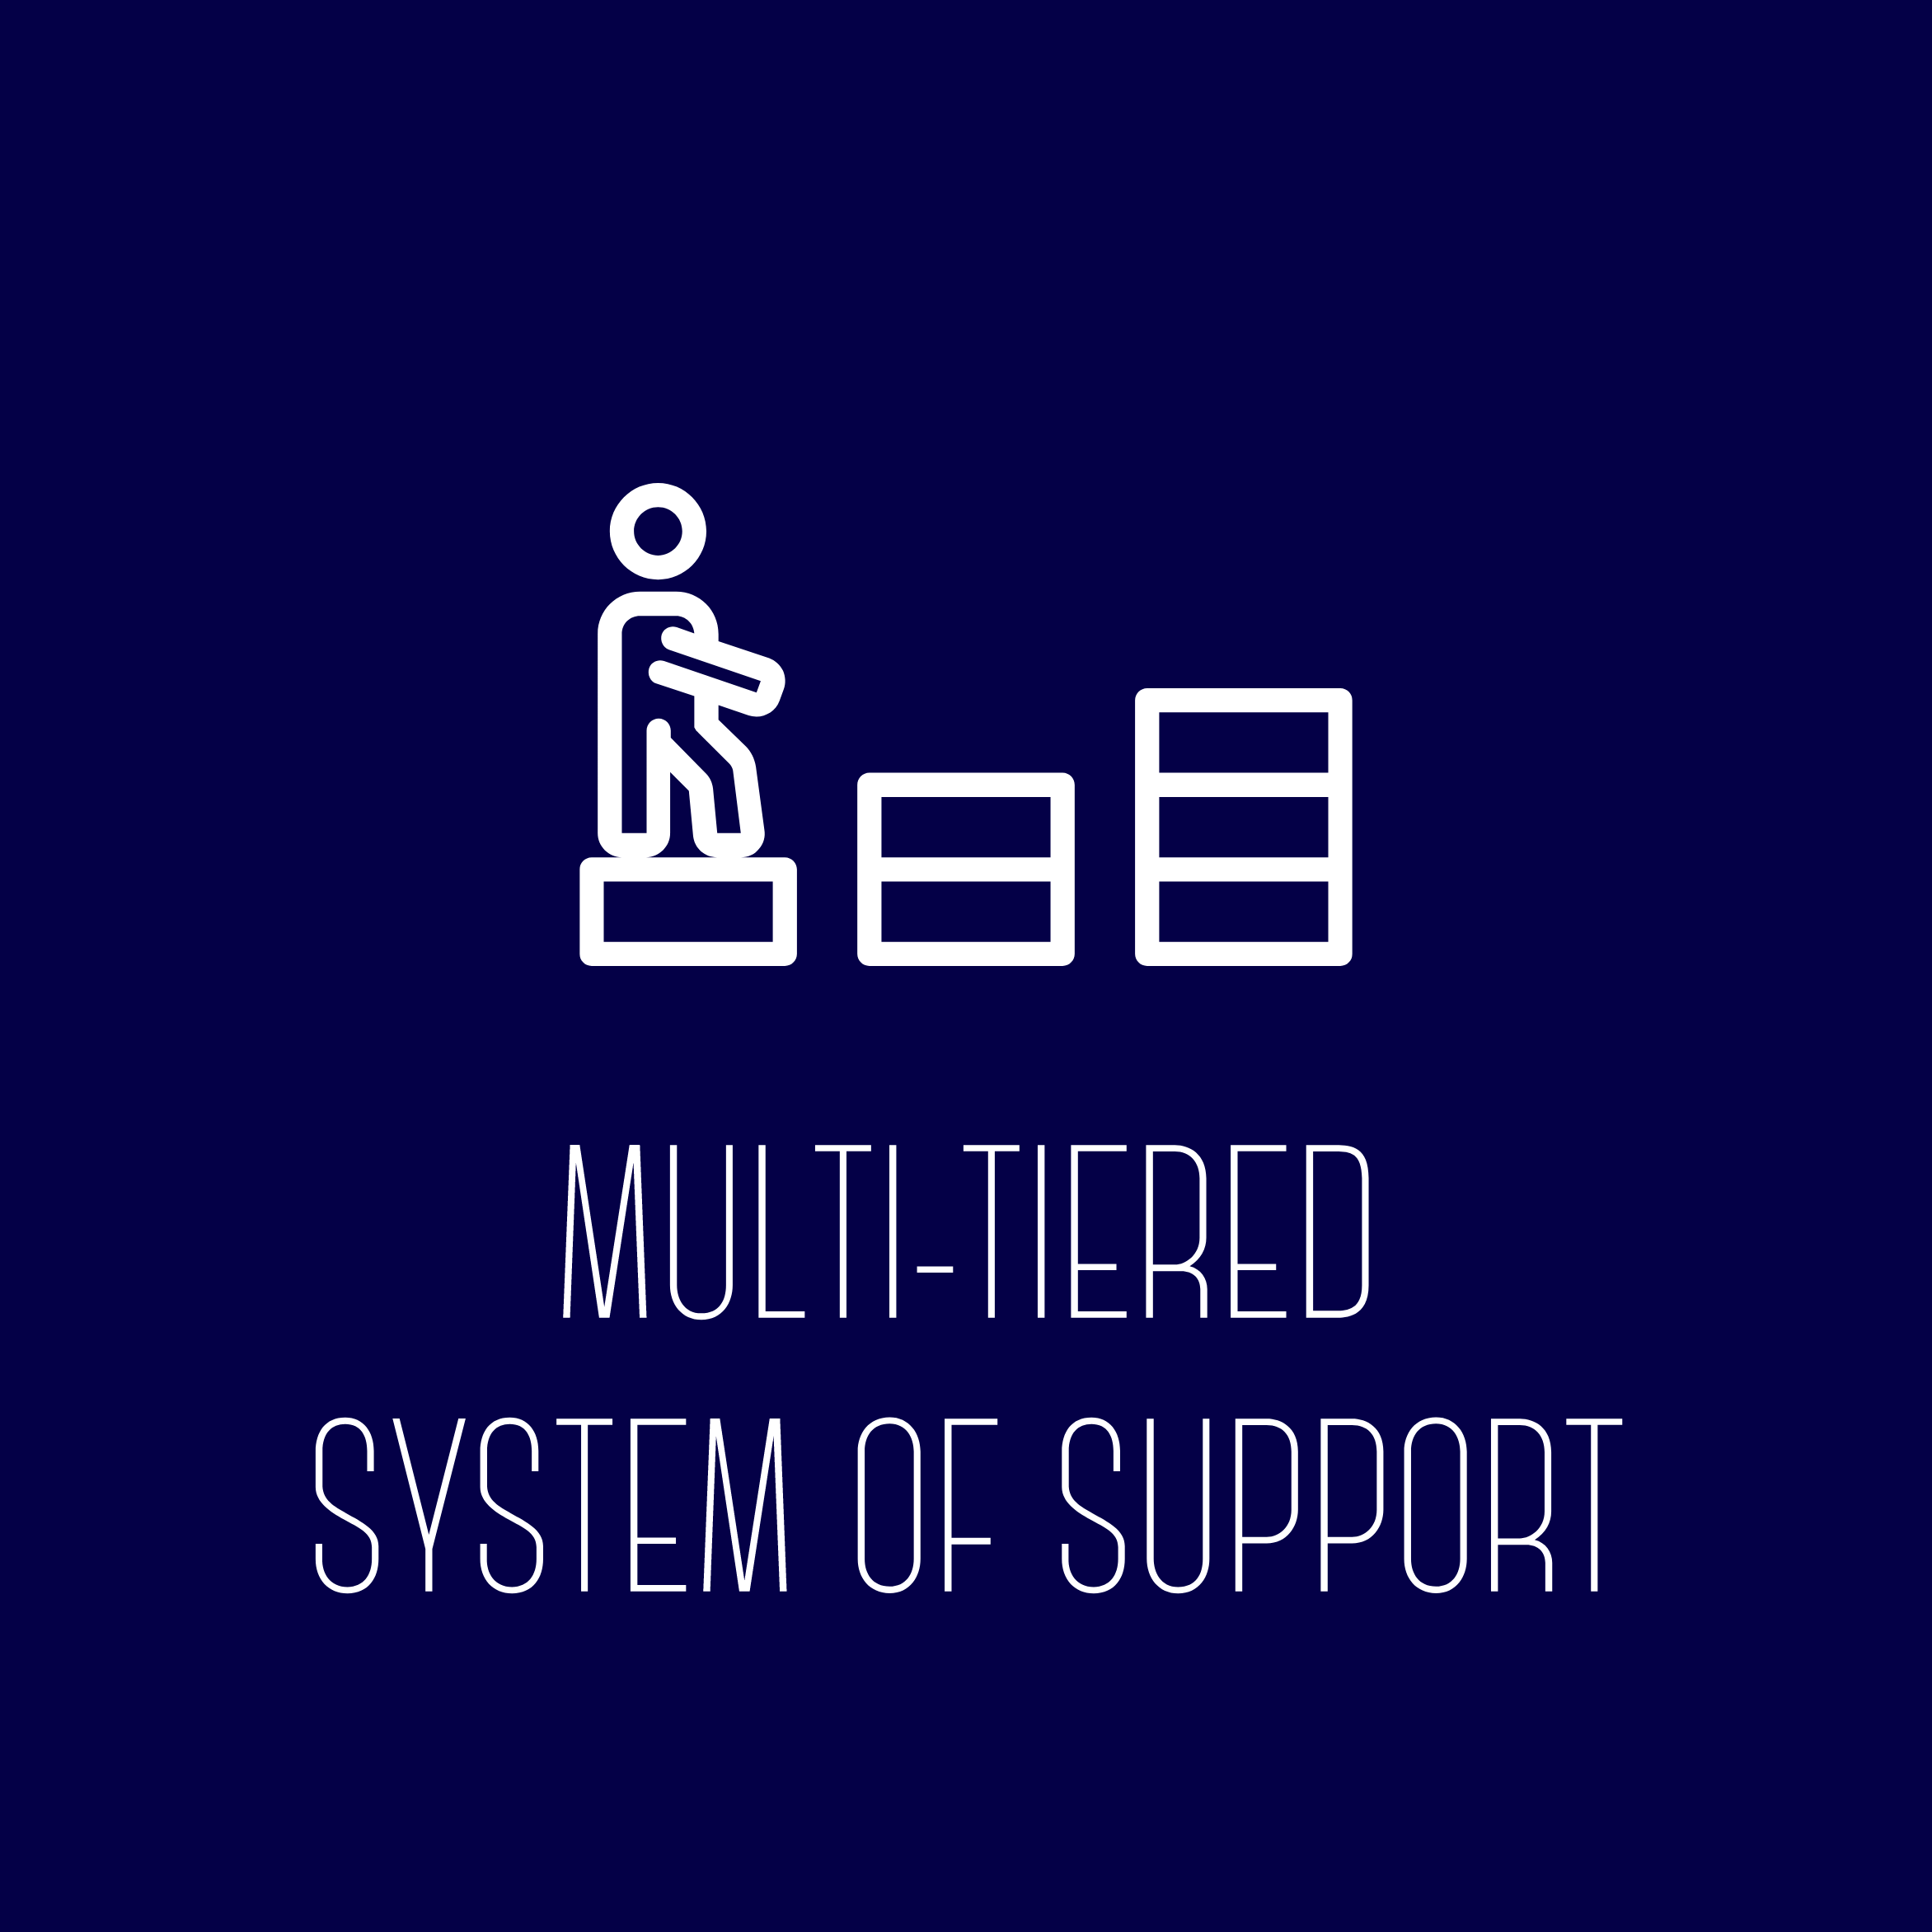 Multi-tiered System of Support